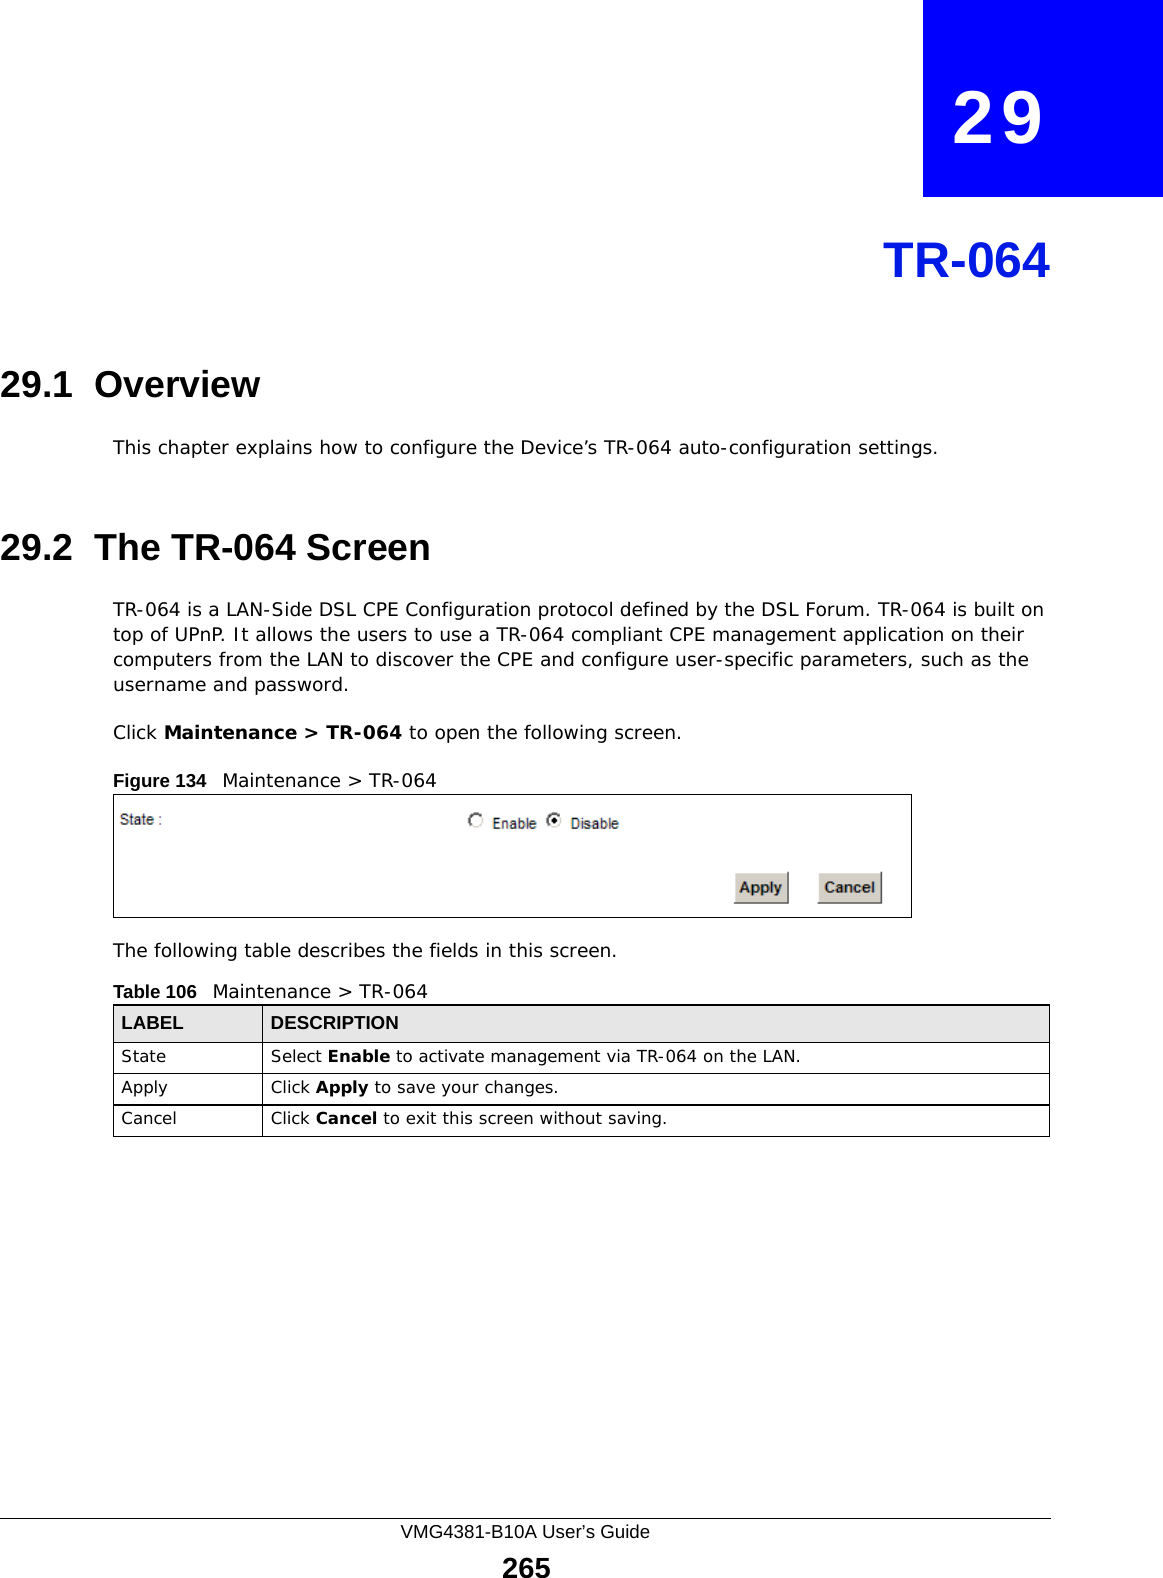 VMG4381-B10A User’s Guide265CHAPTER   29TR-06429.1  OverviewThis chapter explains how to configure the Device’s TR-064 auto-configuration settings.29.2  The TR-064 ScreenTR-064 is a LAN-Side DSL CPE Configuration protocol defined by the DSL Forum. TR-064 is built on top of UPnP. It allows the users to use a TR-064 compliant CPE management application on their computers from the LAN to discover the CPE and configure user-specific parameters, such as the username and password.Click Maintenance &gt; TR-064 to open the following screen. Figure 134   Maintenance &gt; TR-064 The following table describes the fields in this screen. Table 106   Maintenance &gt; TR-064LABEL DESCRIPTIONState Select Enable to activate management via TR-064 on the LAN.Apply Click Apply to save your changes.Cancel Click Cancel to exit this screen without saving.